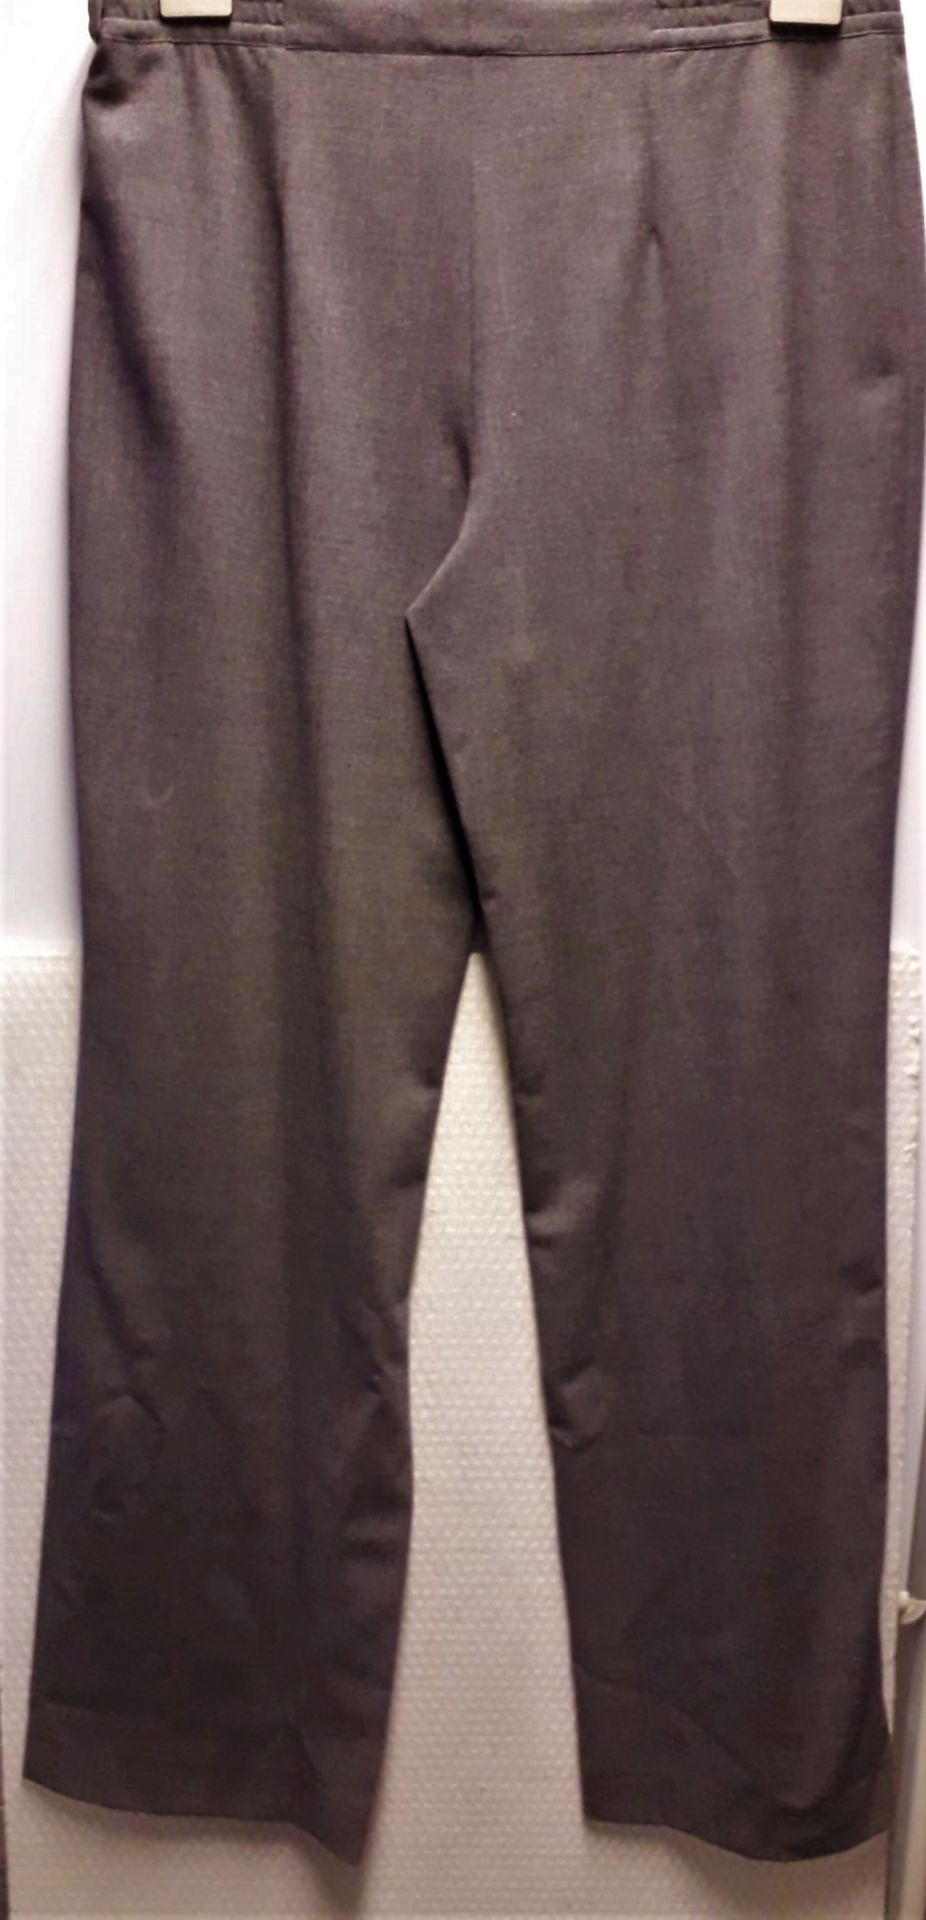 1 x Natan Plus Grey Trousers - Size: 48 - Material: 96% Virgin Wool, 4% Elastane - From a High End